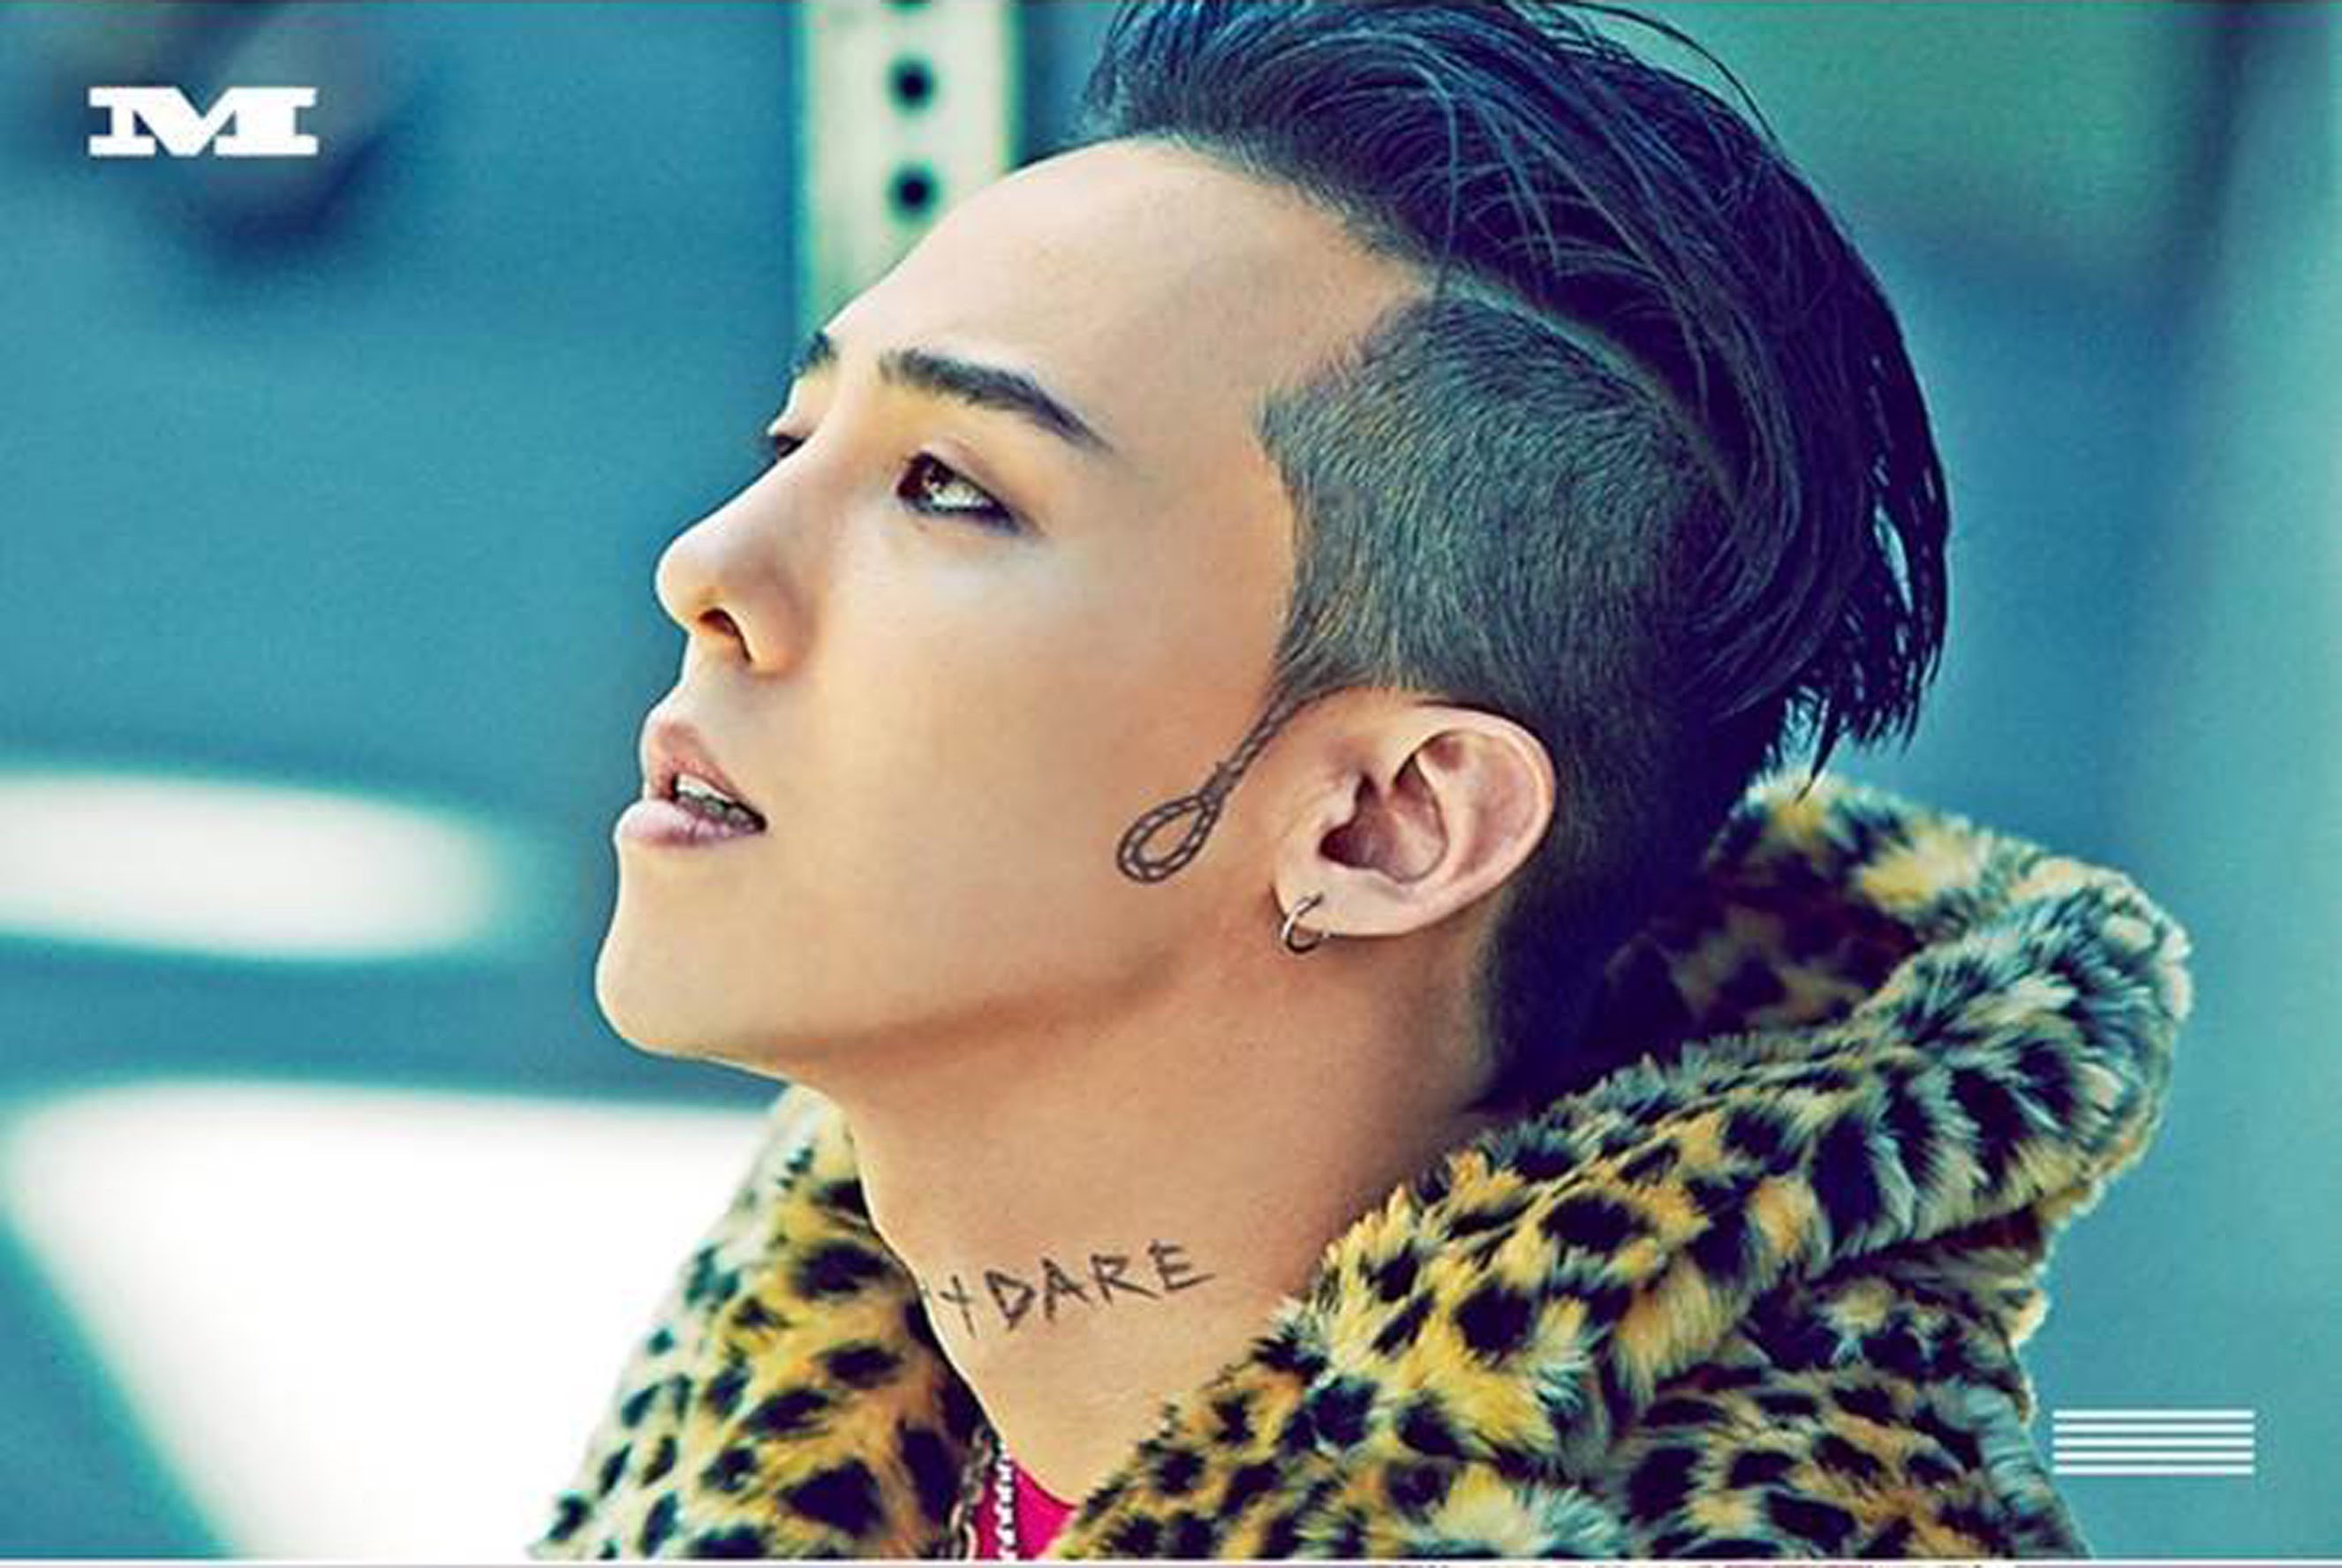 BIGBANG'S T.O.P is back: 5 things we learnt about his anticipated return